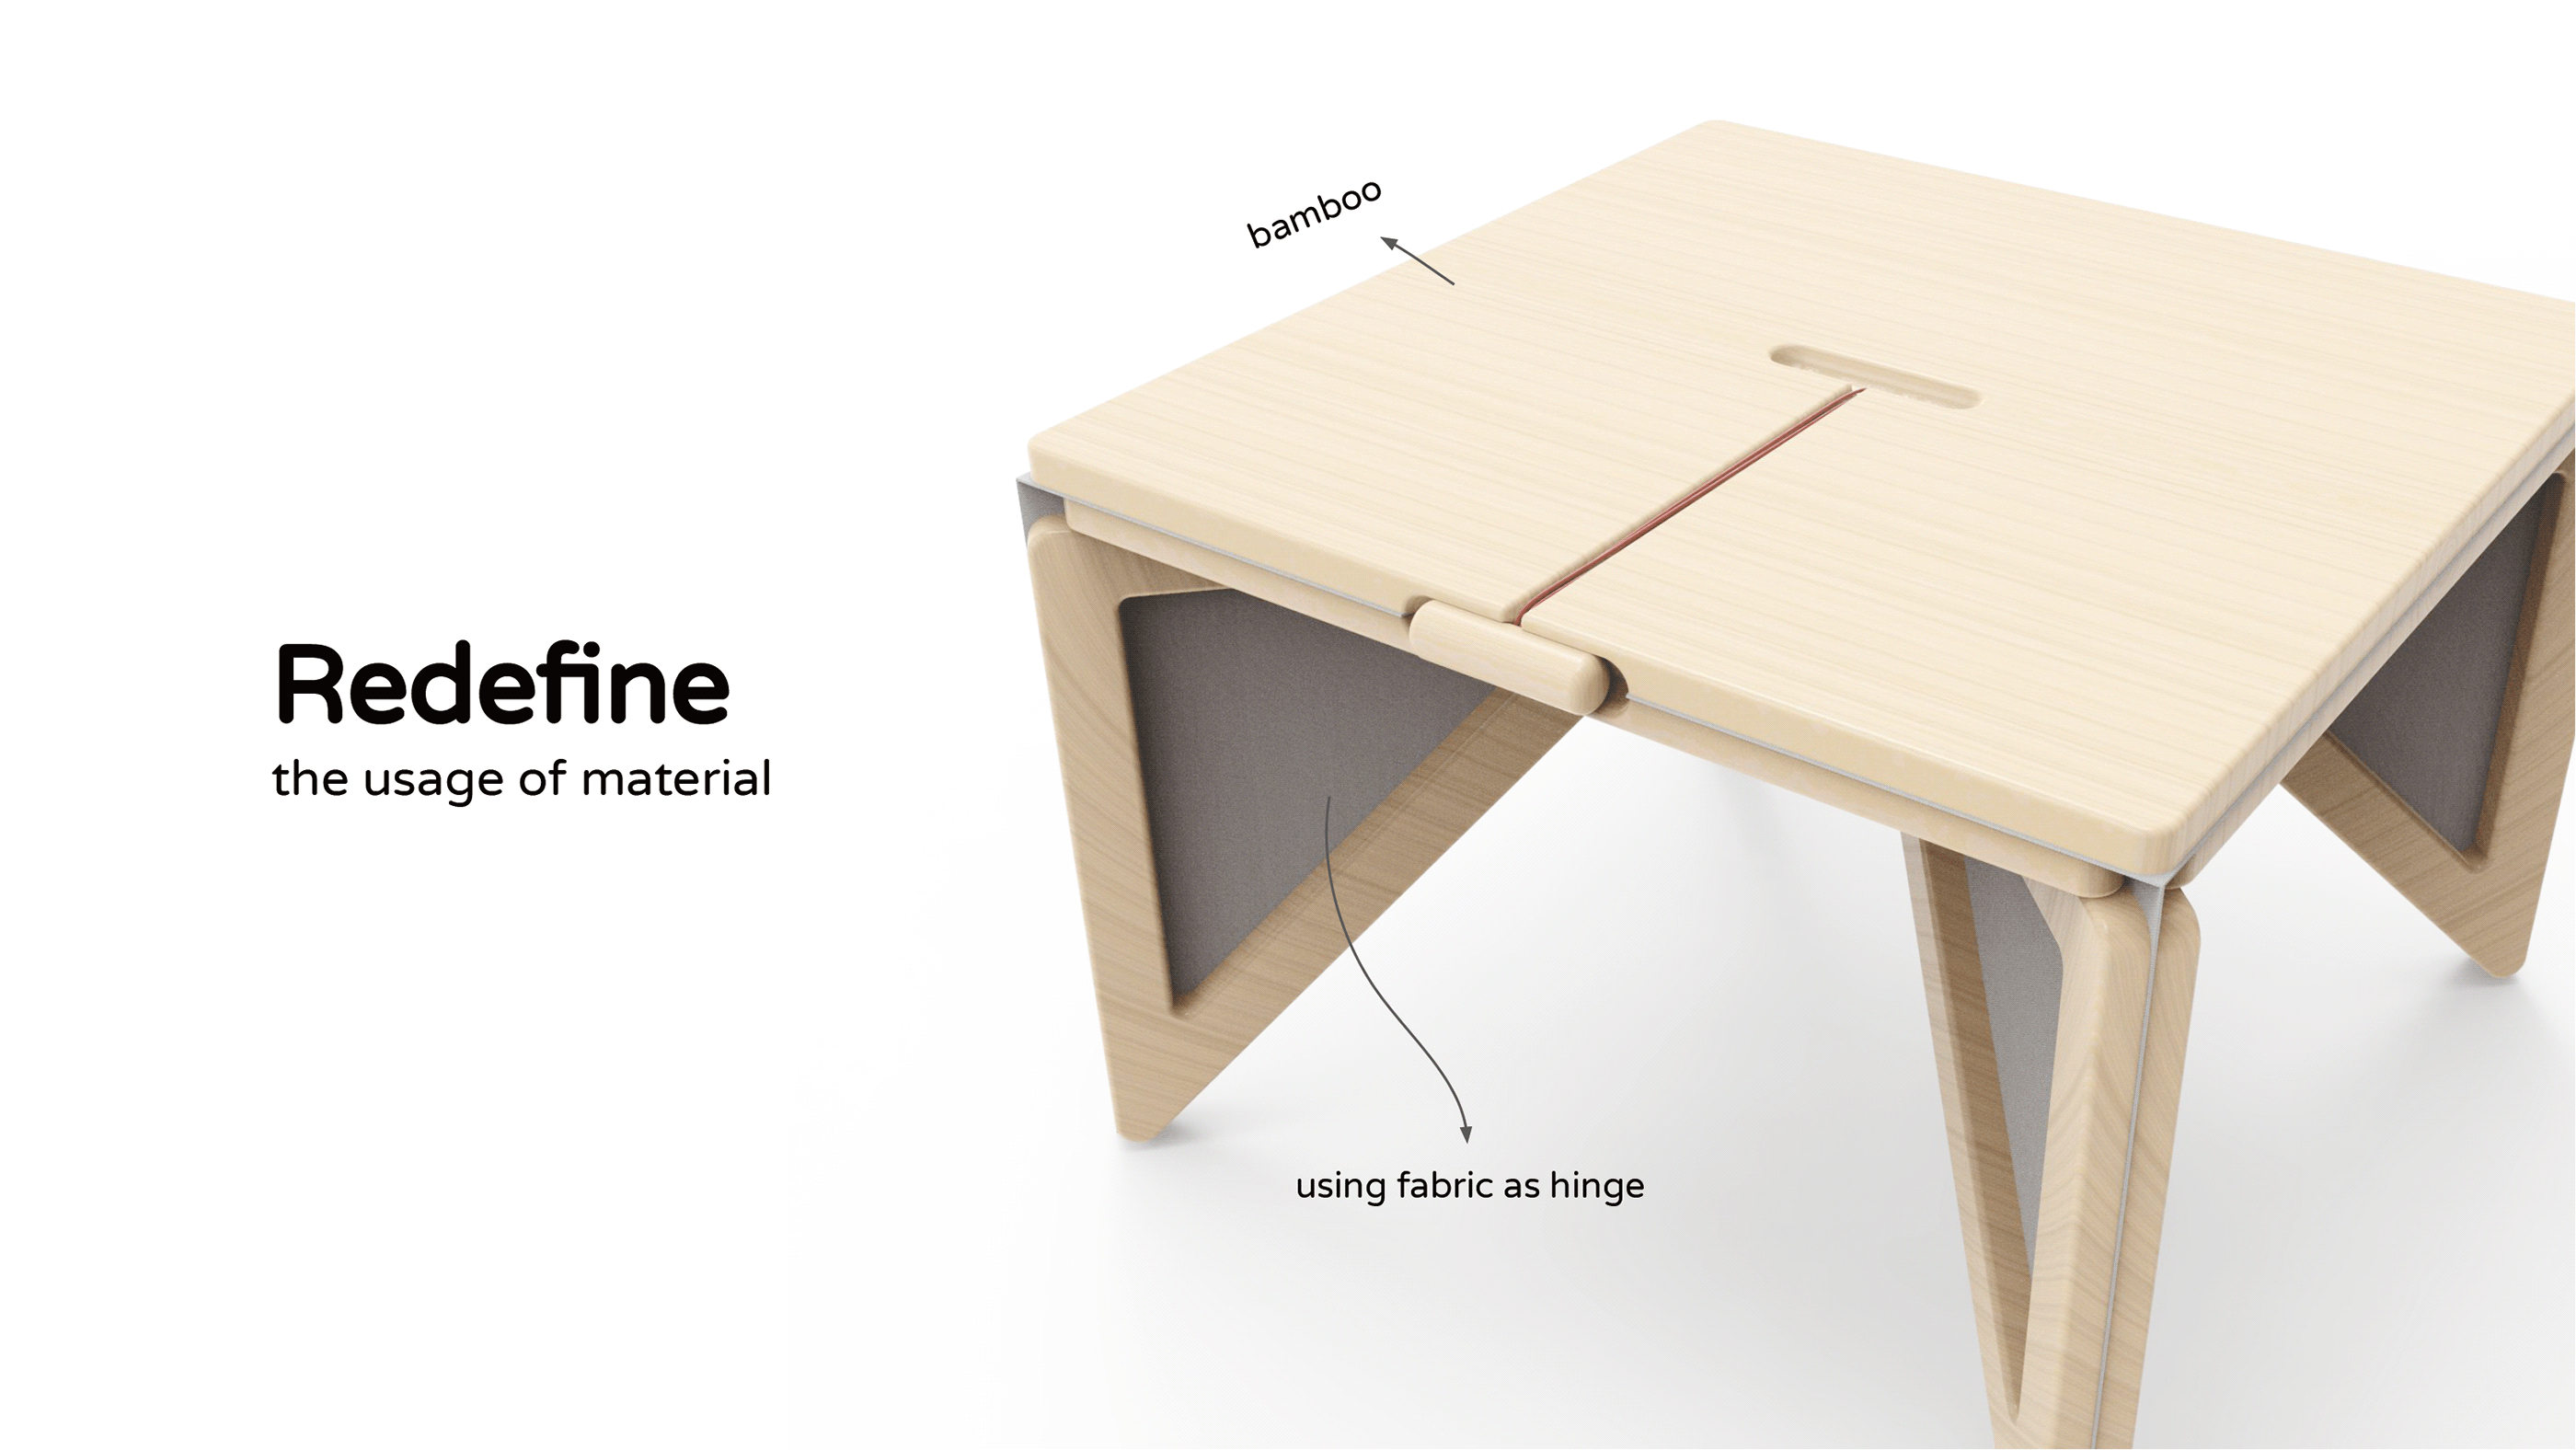 Origami Table on Behance